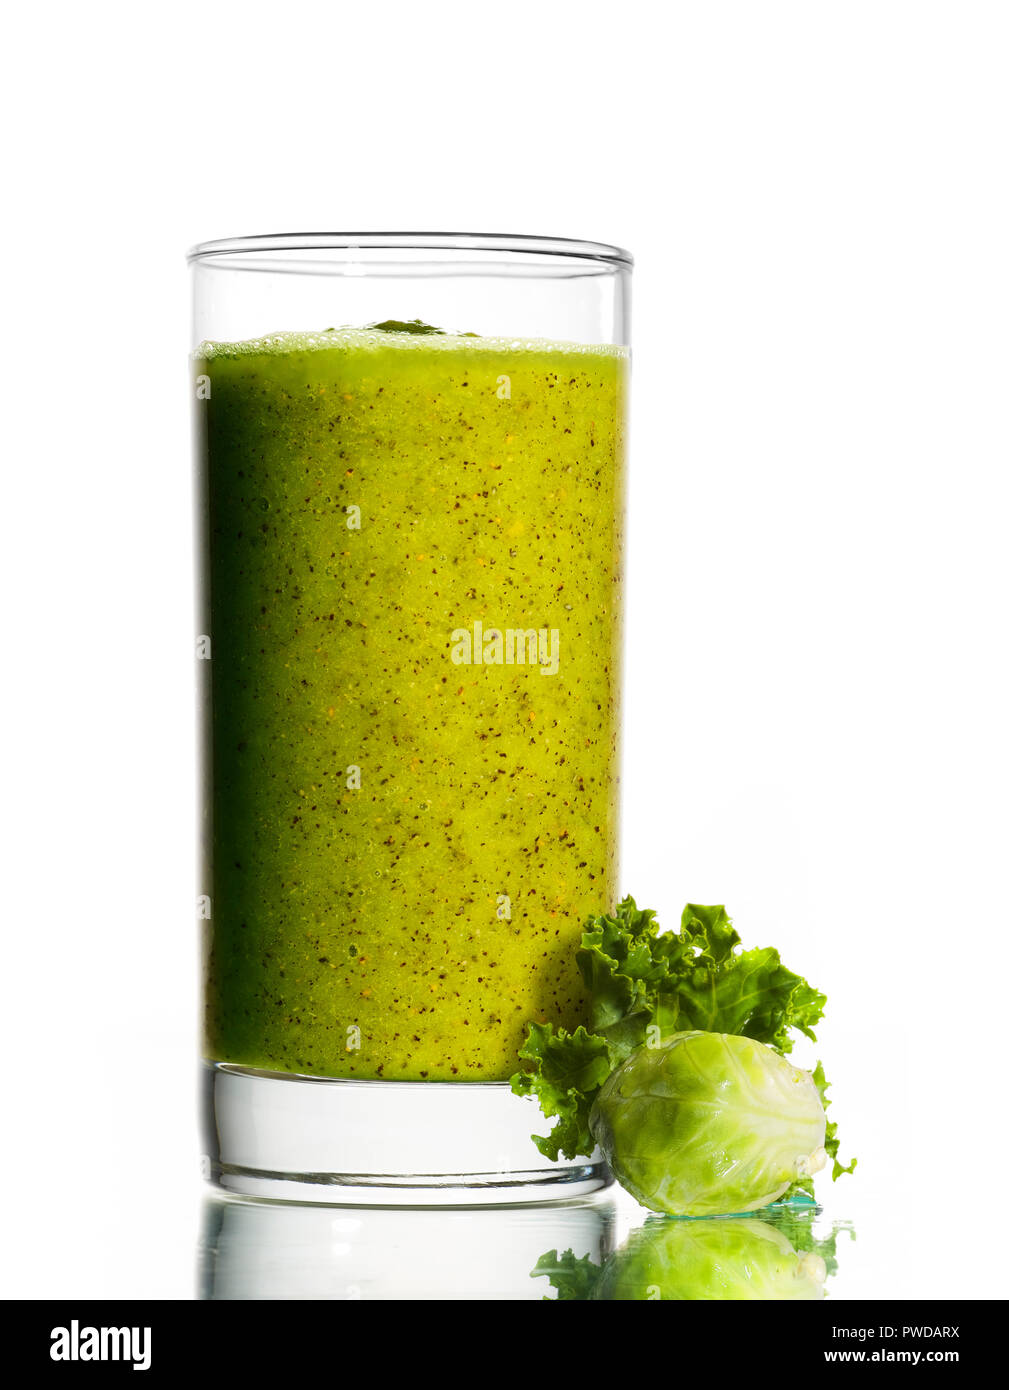 Glass of Green Healthy Drink Smoothie, Detox Juice, Kiwi Kale, Brussel Sprouts Stock Photo